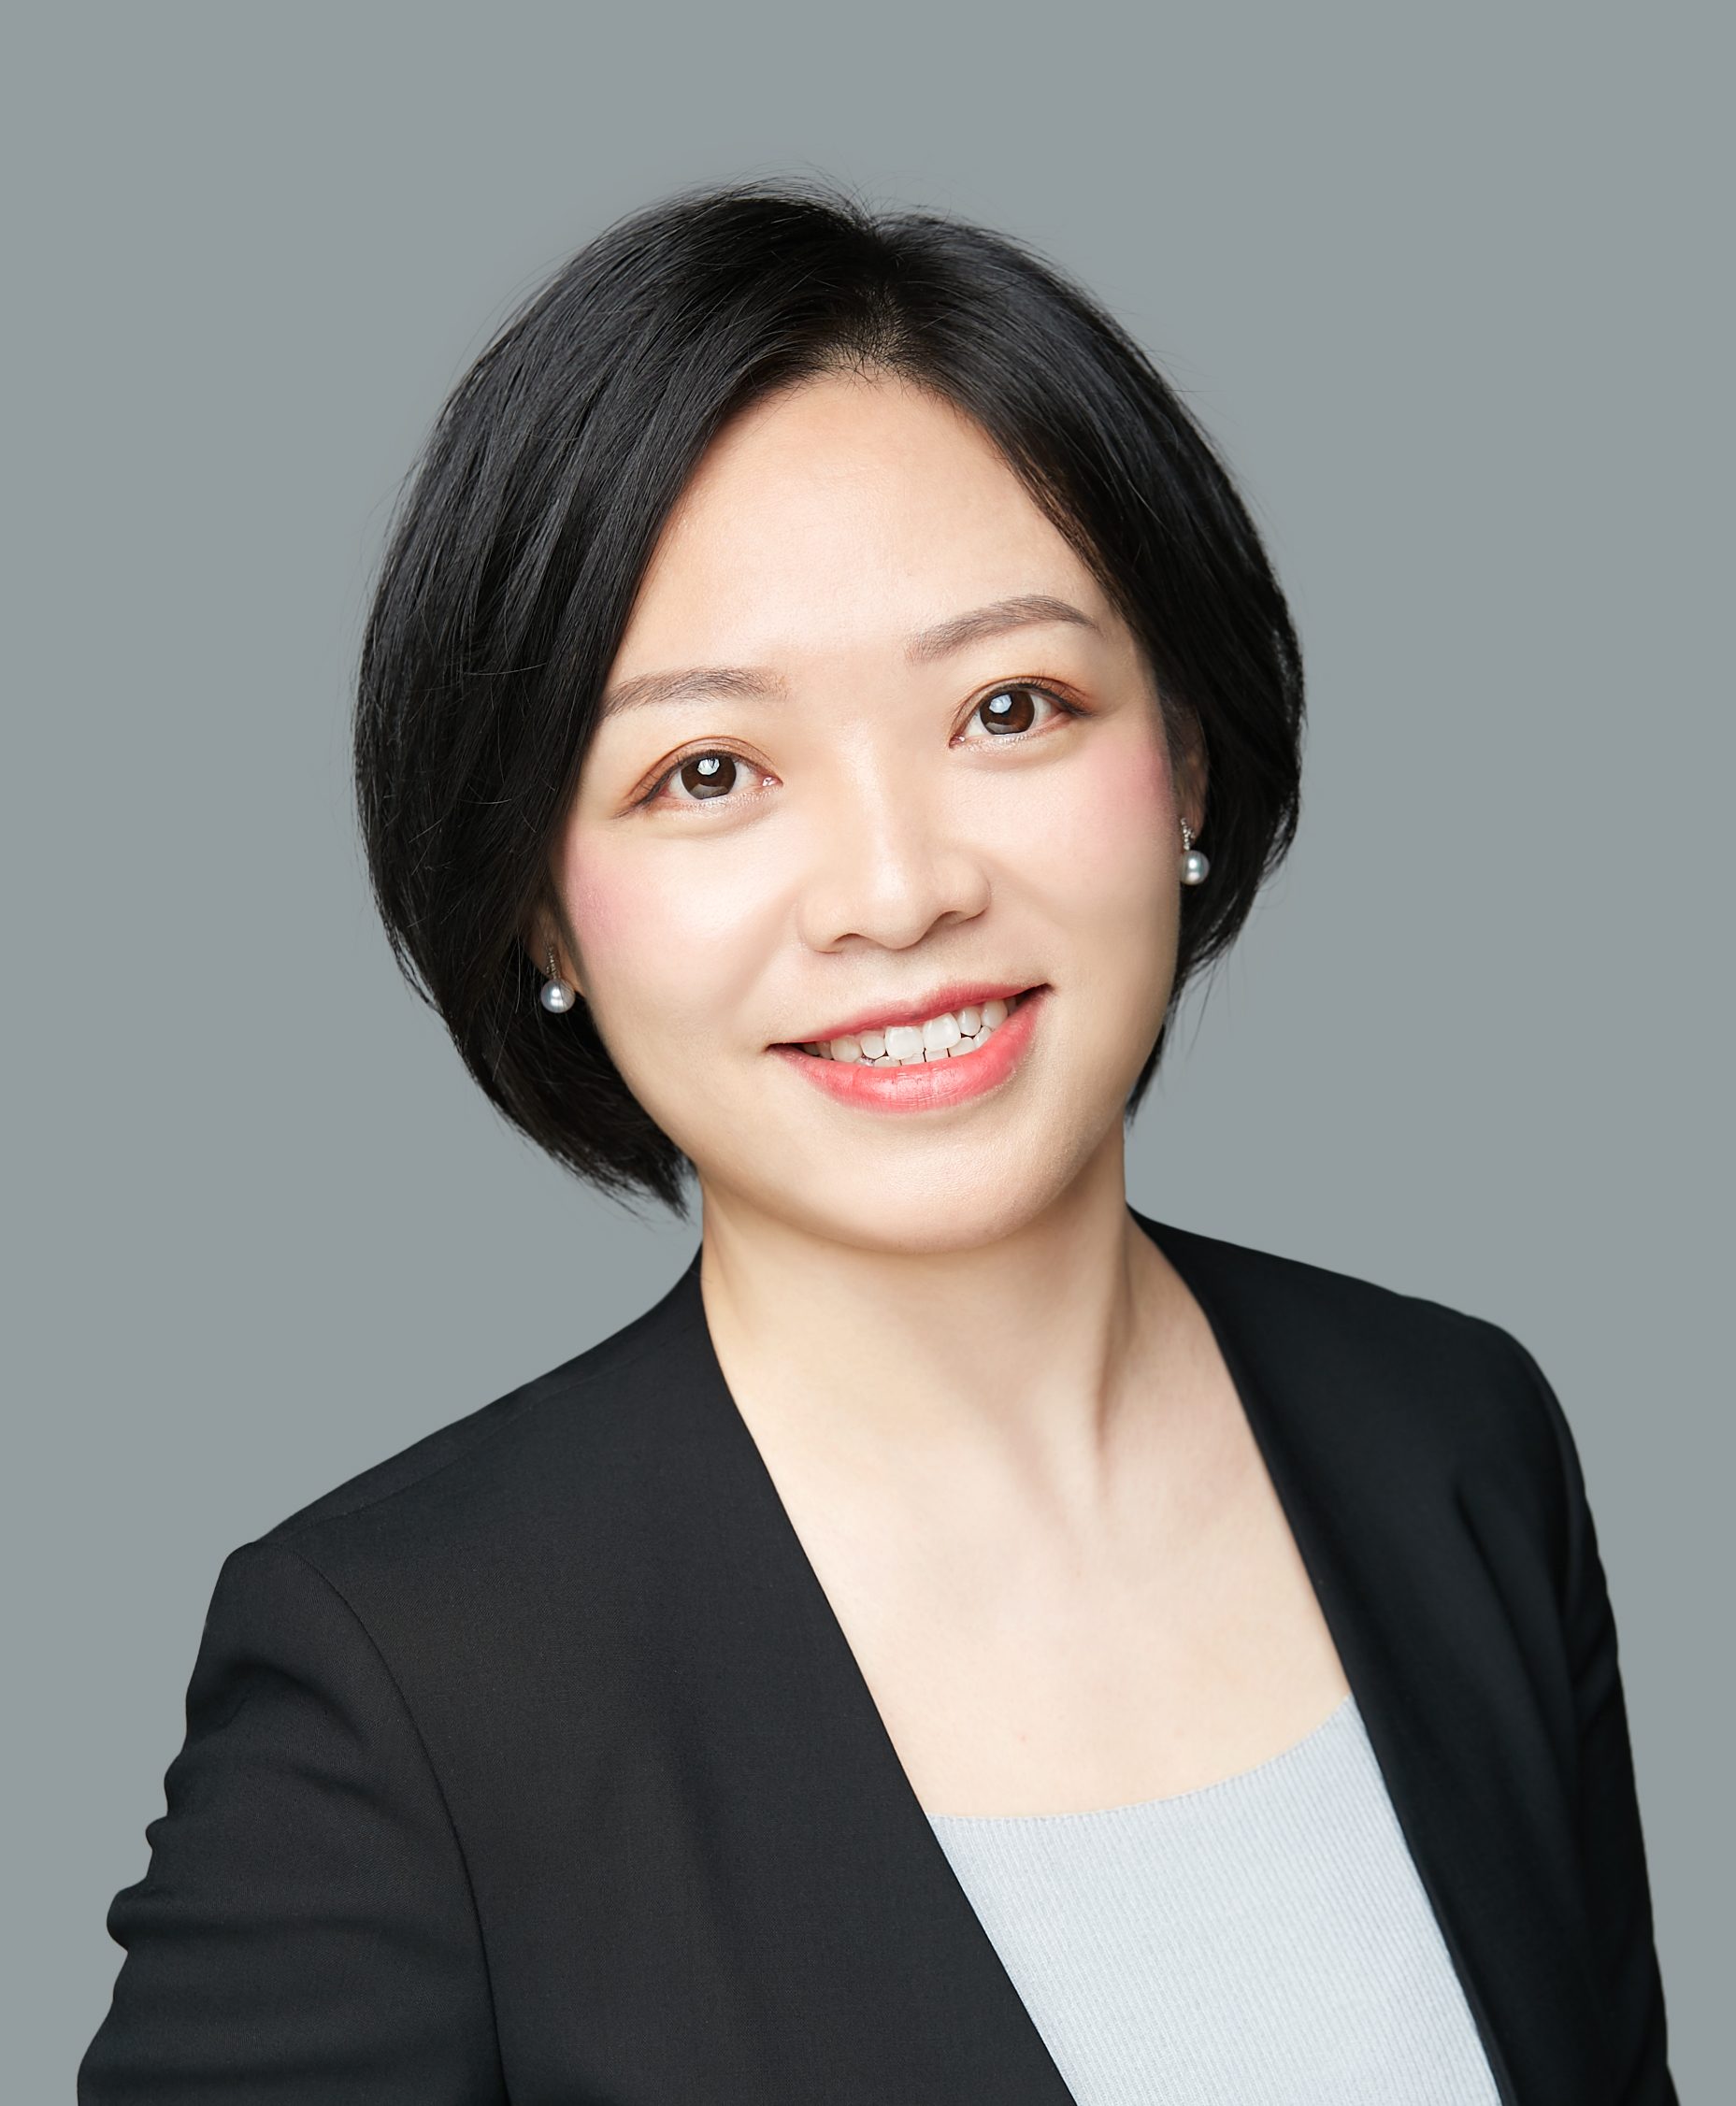 We see promise in industry internet, and new consumer sectors, says ZWC's Vivian Xu